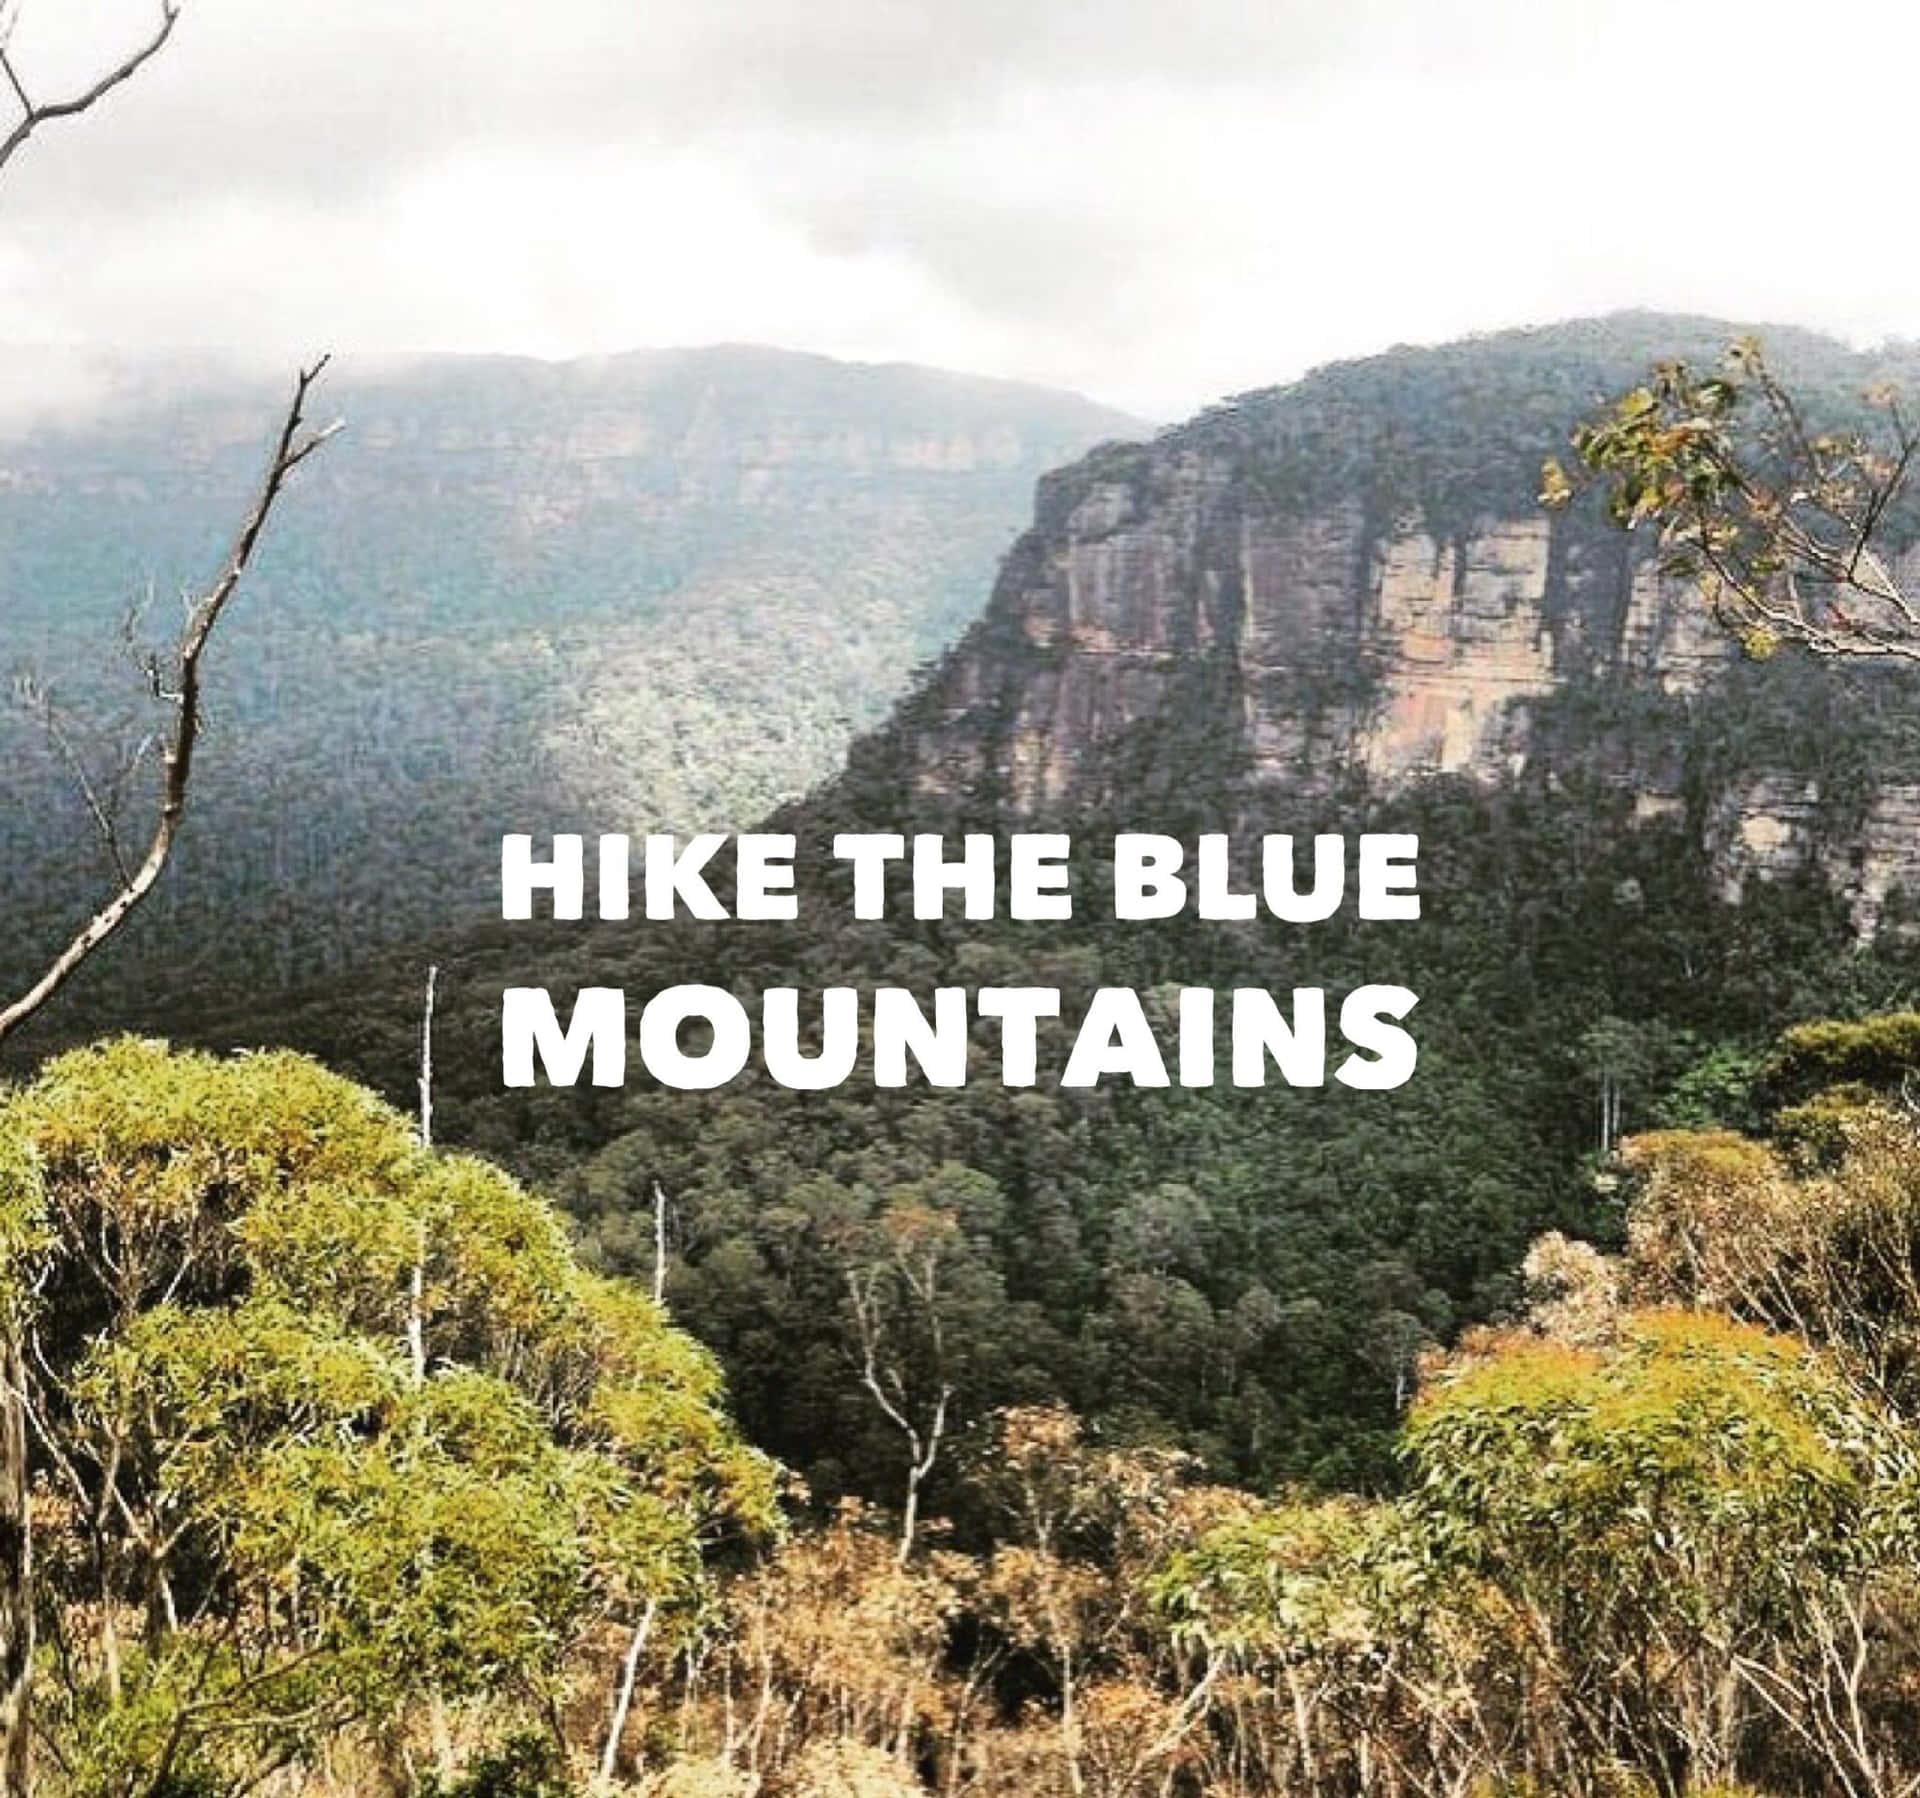 A stunning landscape view of the Blue Mountains National Park. Wallpaper